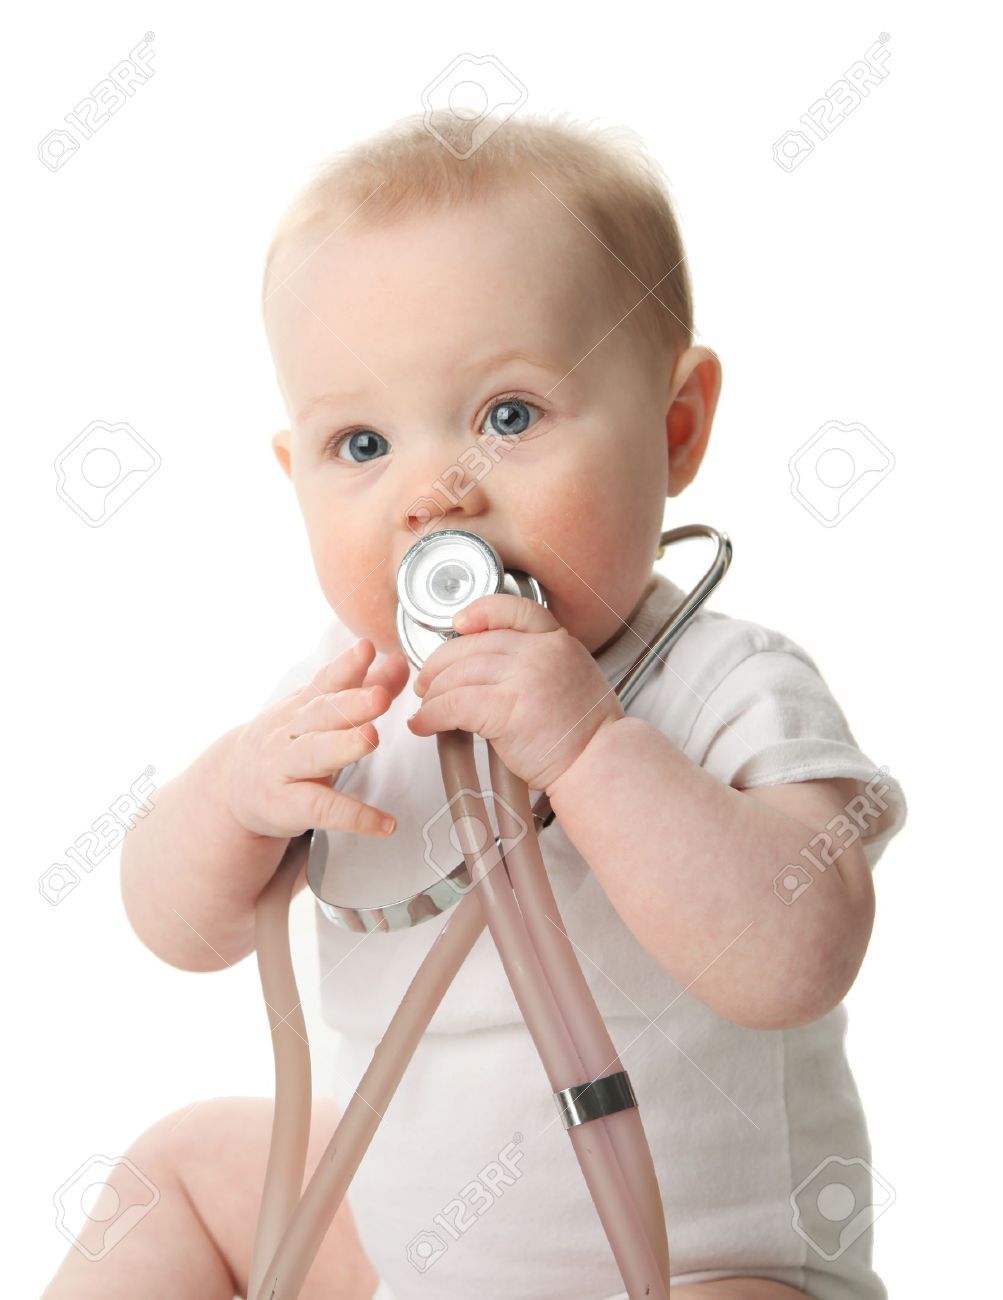 Cute Doctor Image - White Baby With Stethoscope , HD Wallpaper & Backgrounds